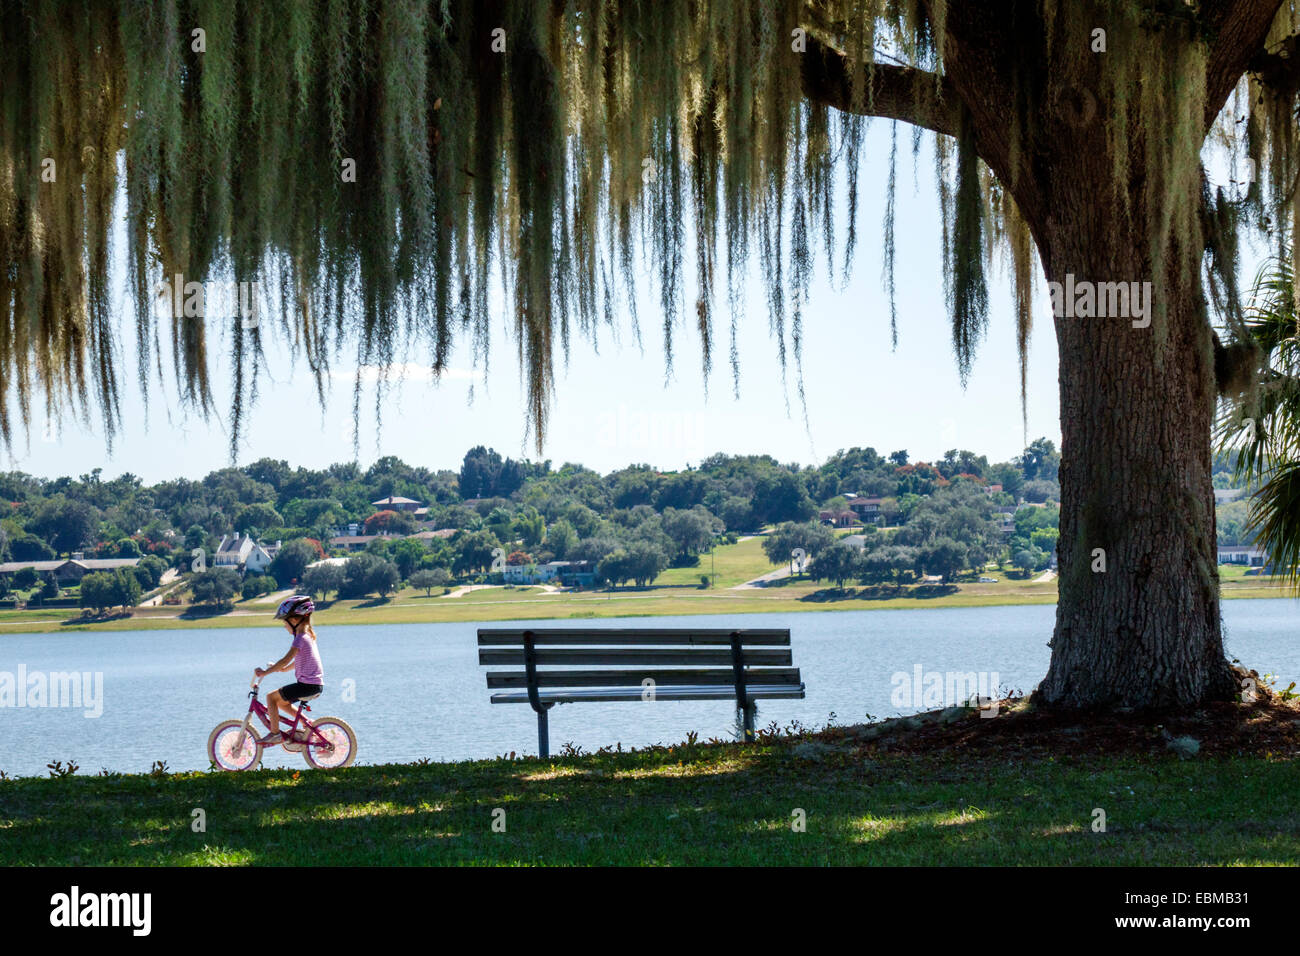 Lake Wales Florida,Lake Wailes,public park,Spanish moss,hanging,girl girls,youngster youngsters youth youths female kid kids child children,riding,bic Stock Photo